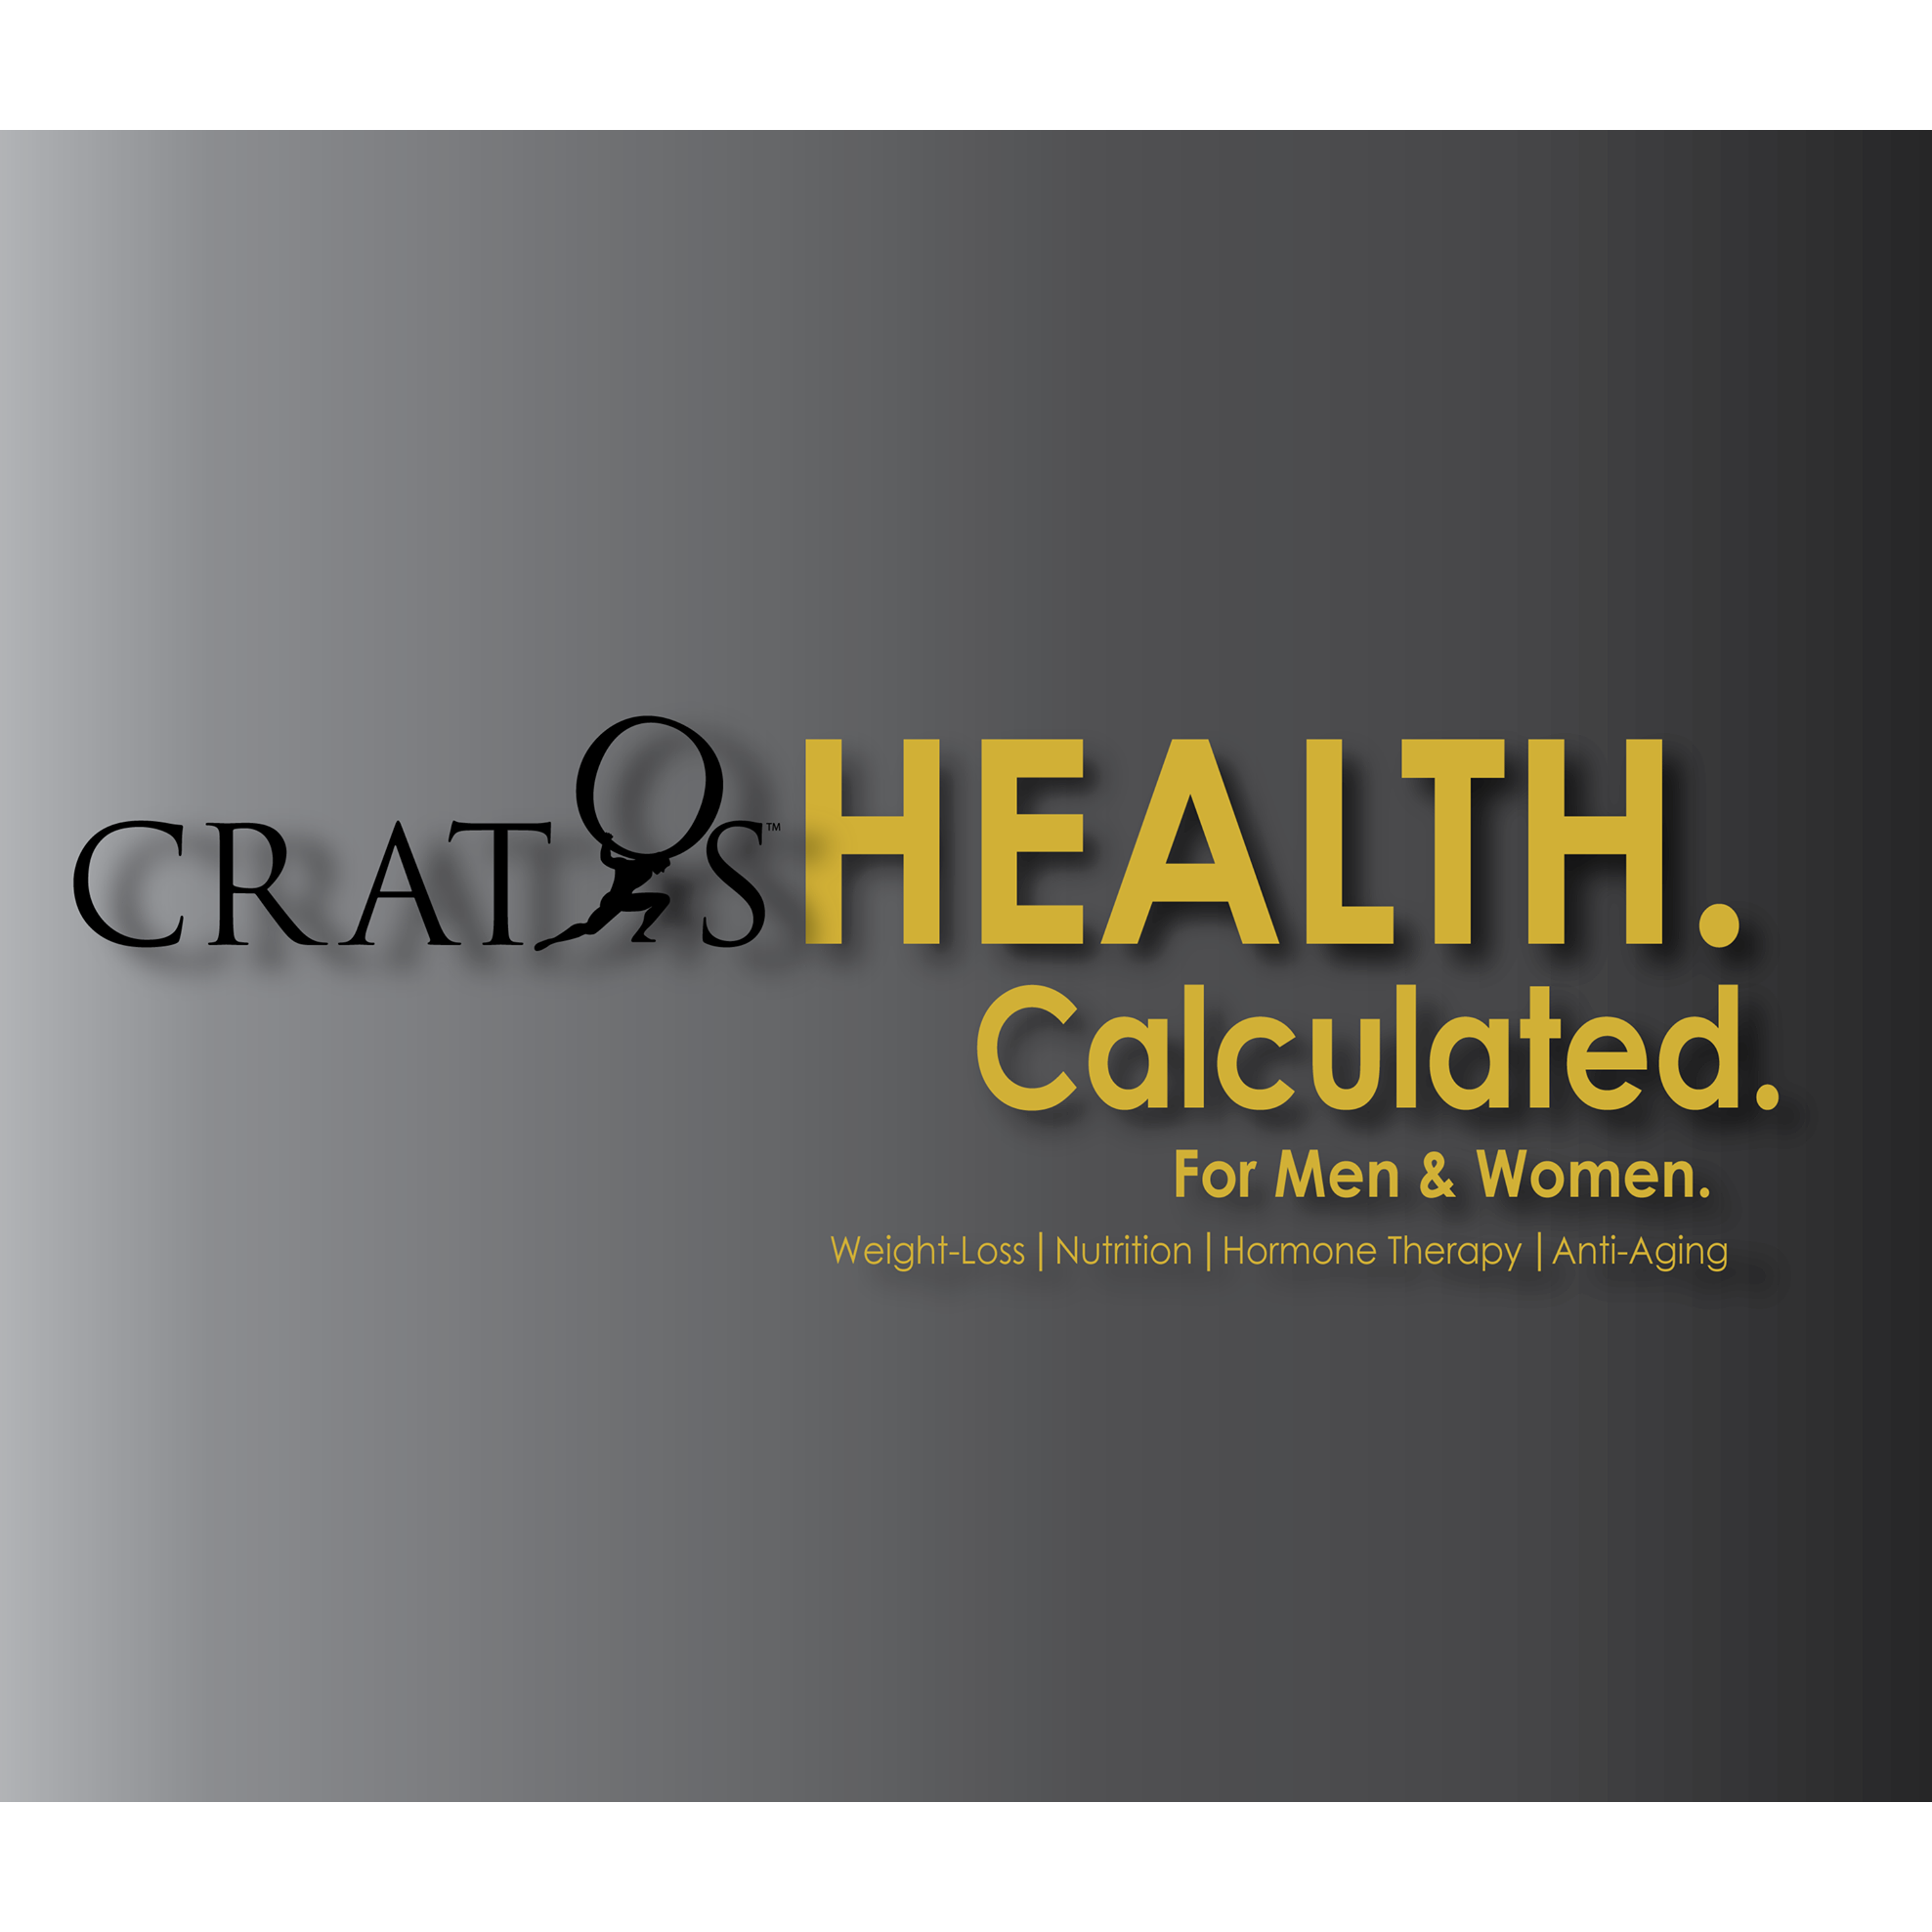 Cratos Health Calculated - Southgate Photo